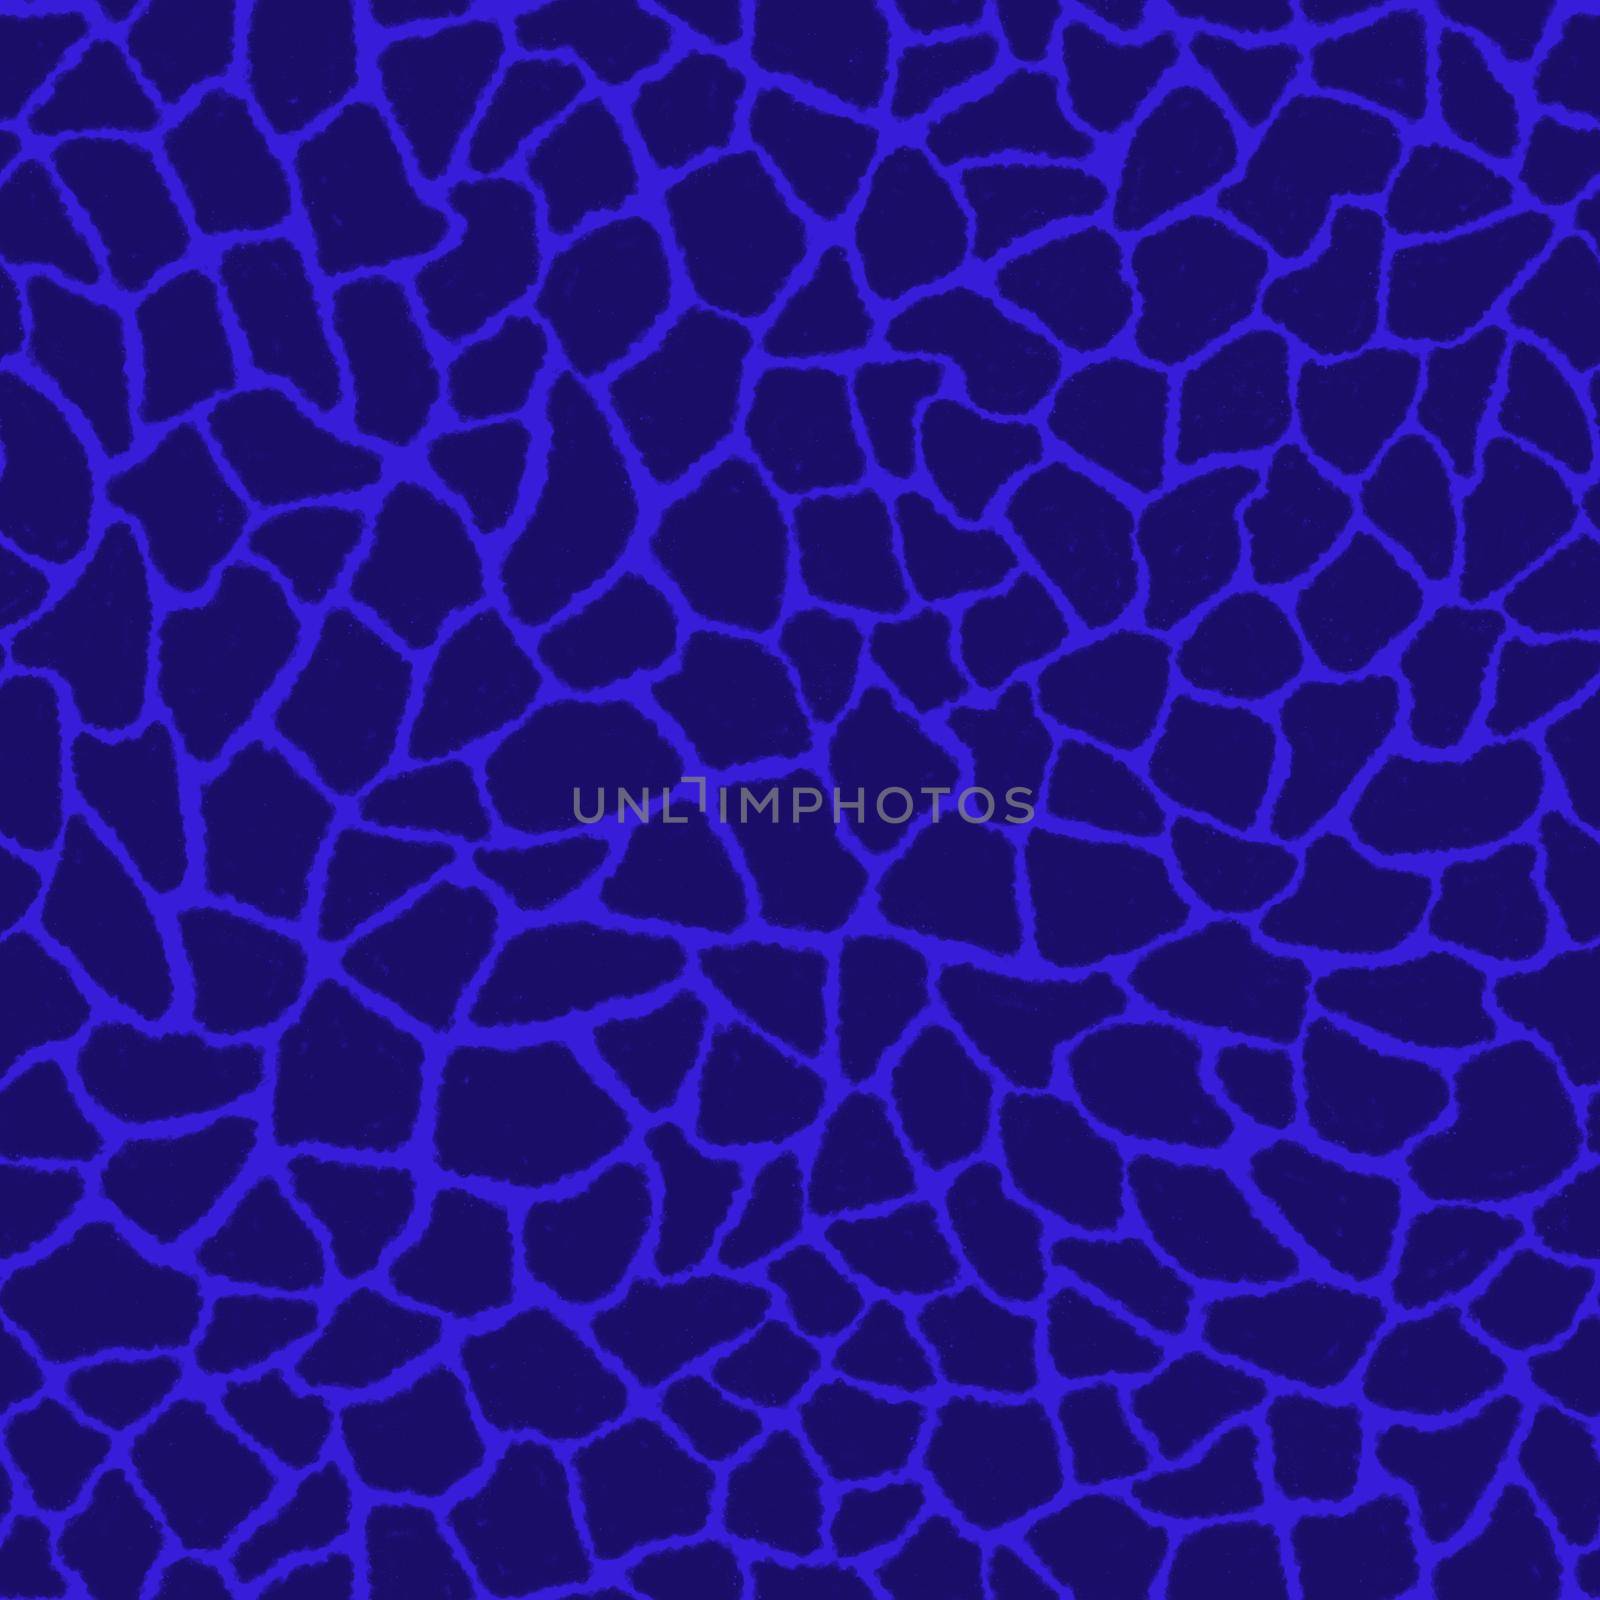 Giraffe skin color seamless pattern with fashion animal print for continuous replicate. Chaotic mosaic violet pieces on azure background. Wrapping paper, funny textile fabric print,design,decor.